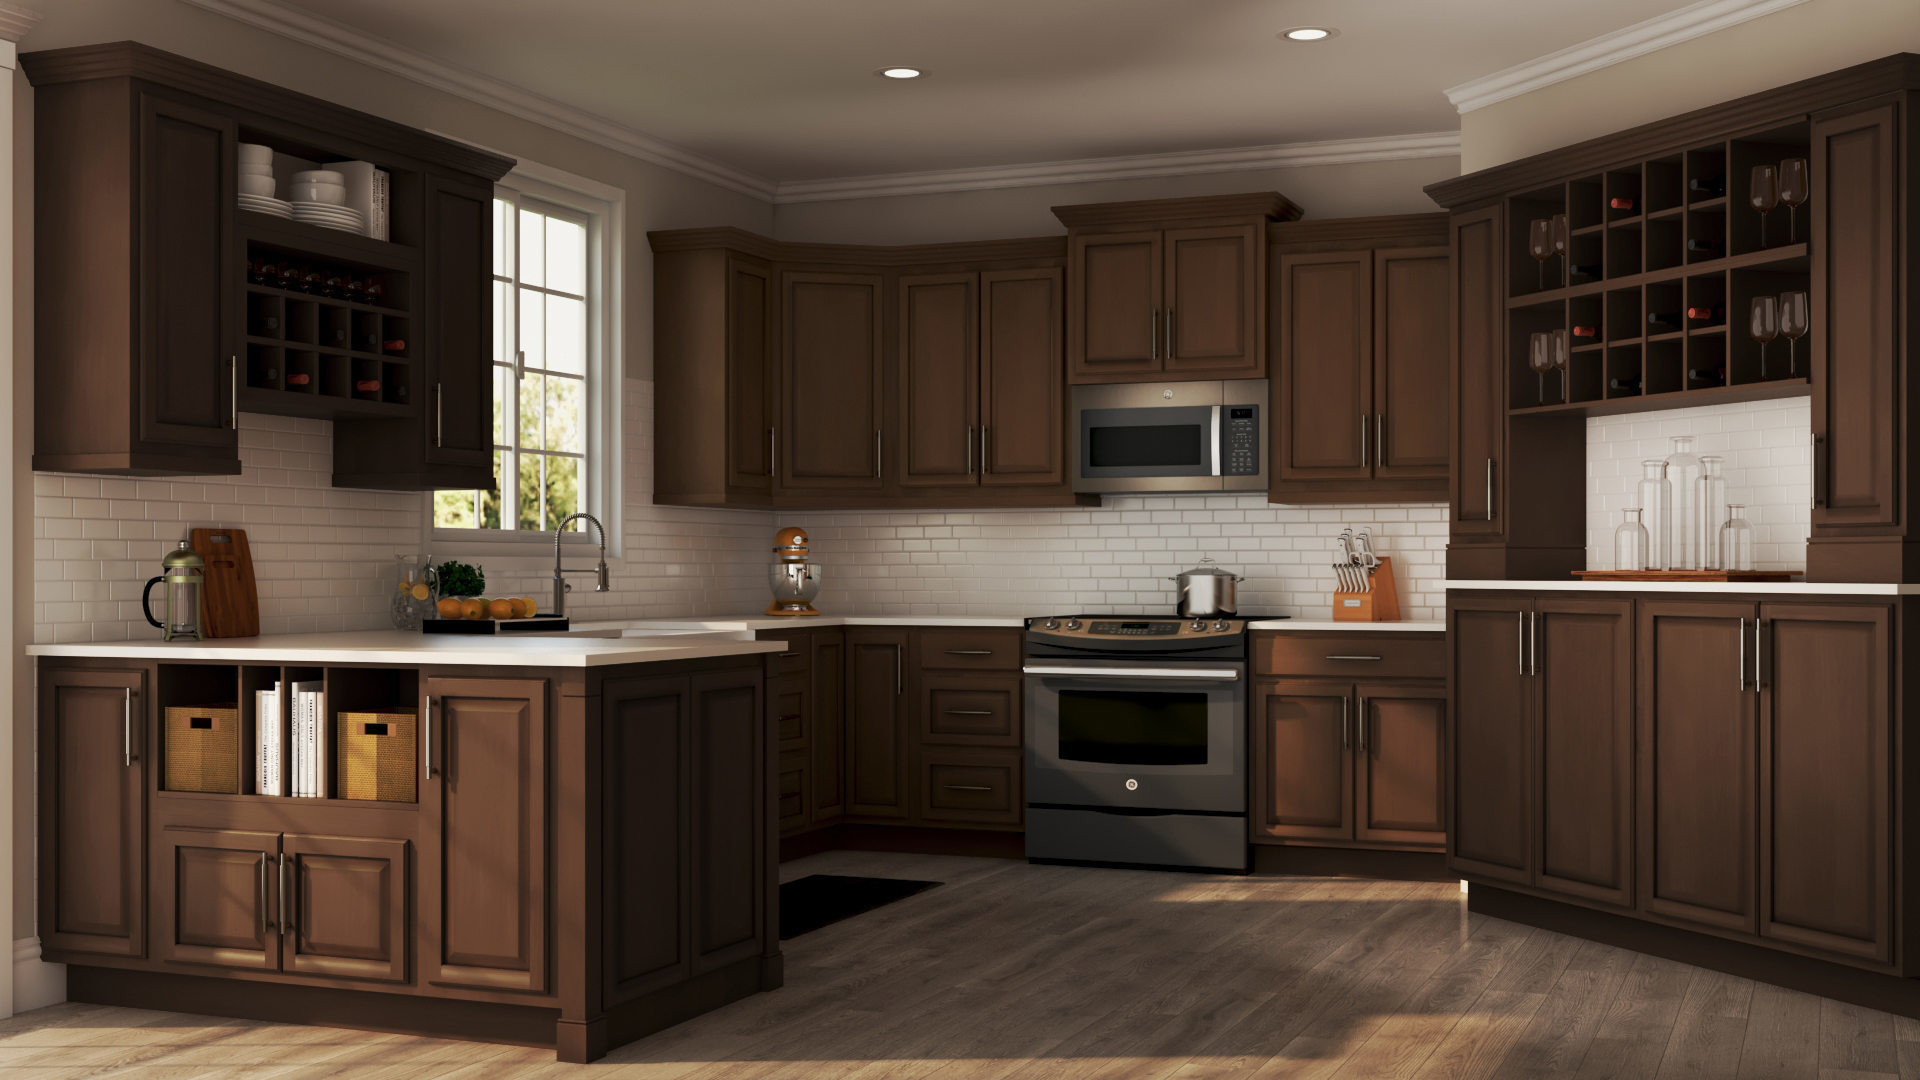 Homedepot Kitchen Cabinets
 Hampton Wall Kitchen Cabinets in Cognac – Kitchen – The